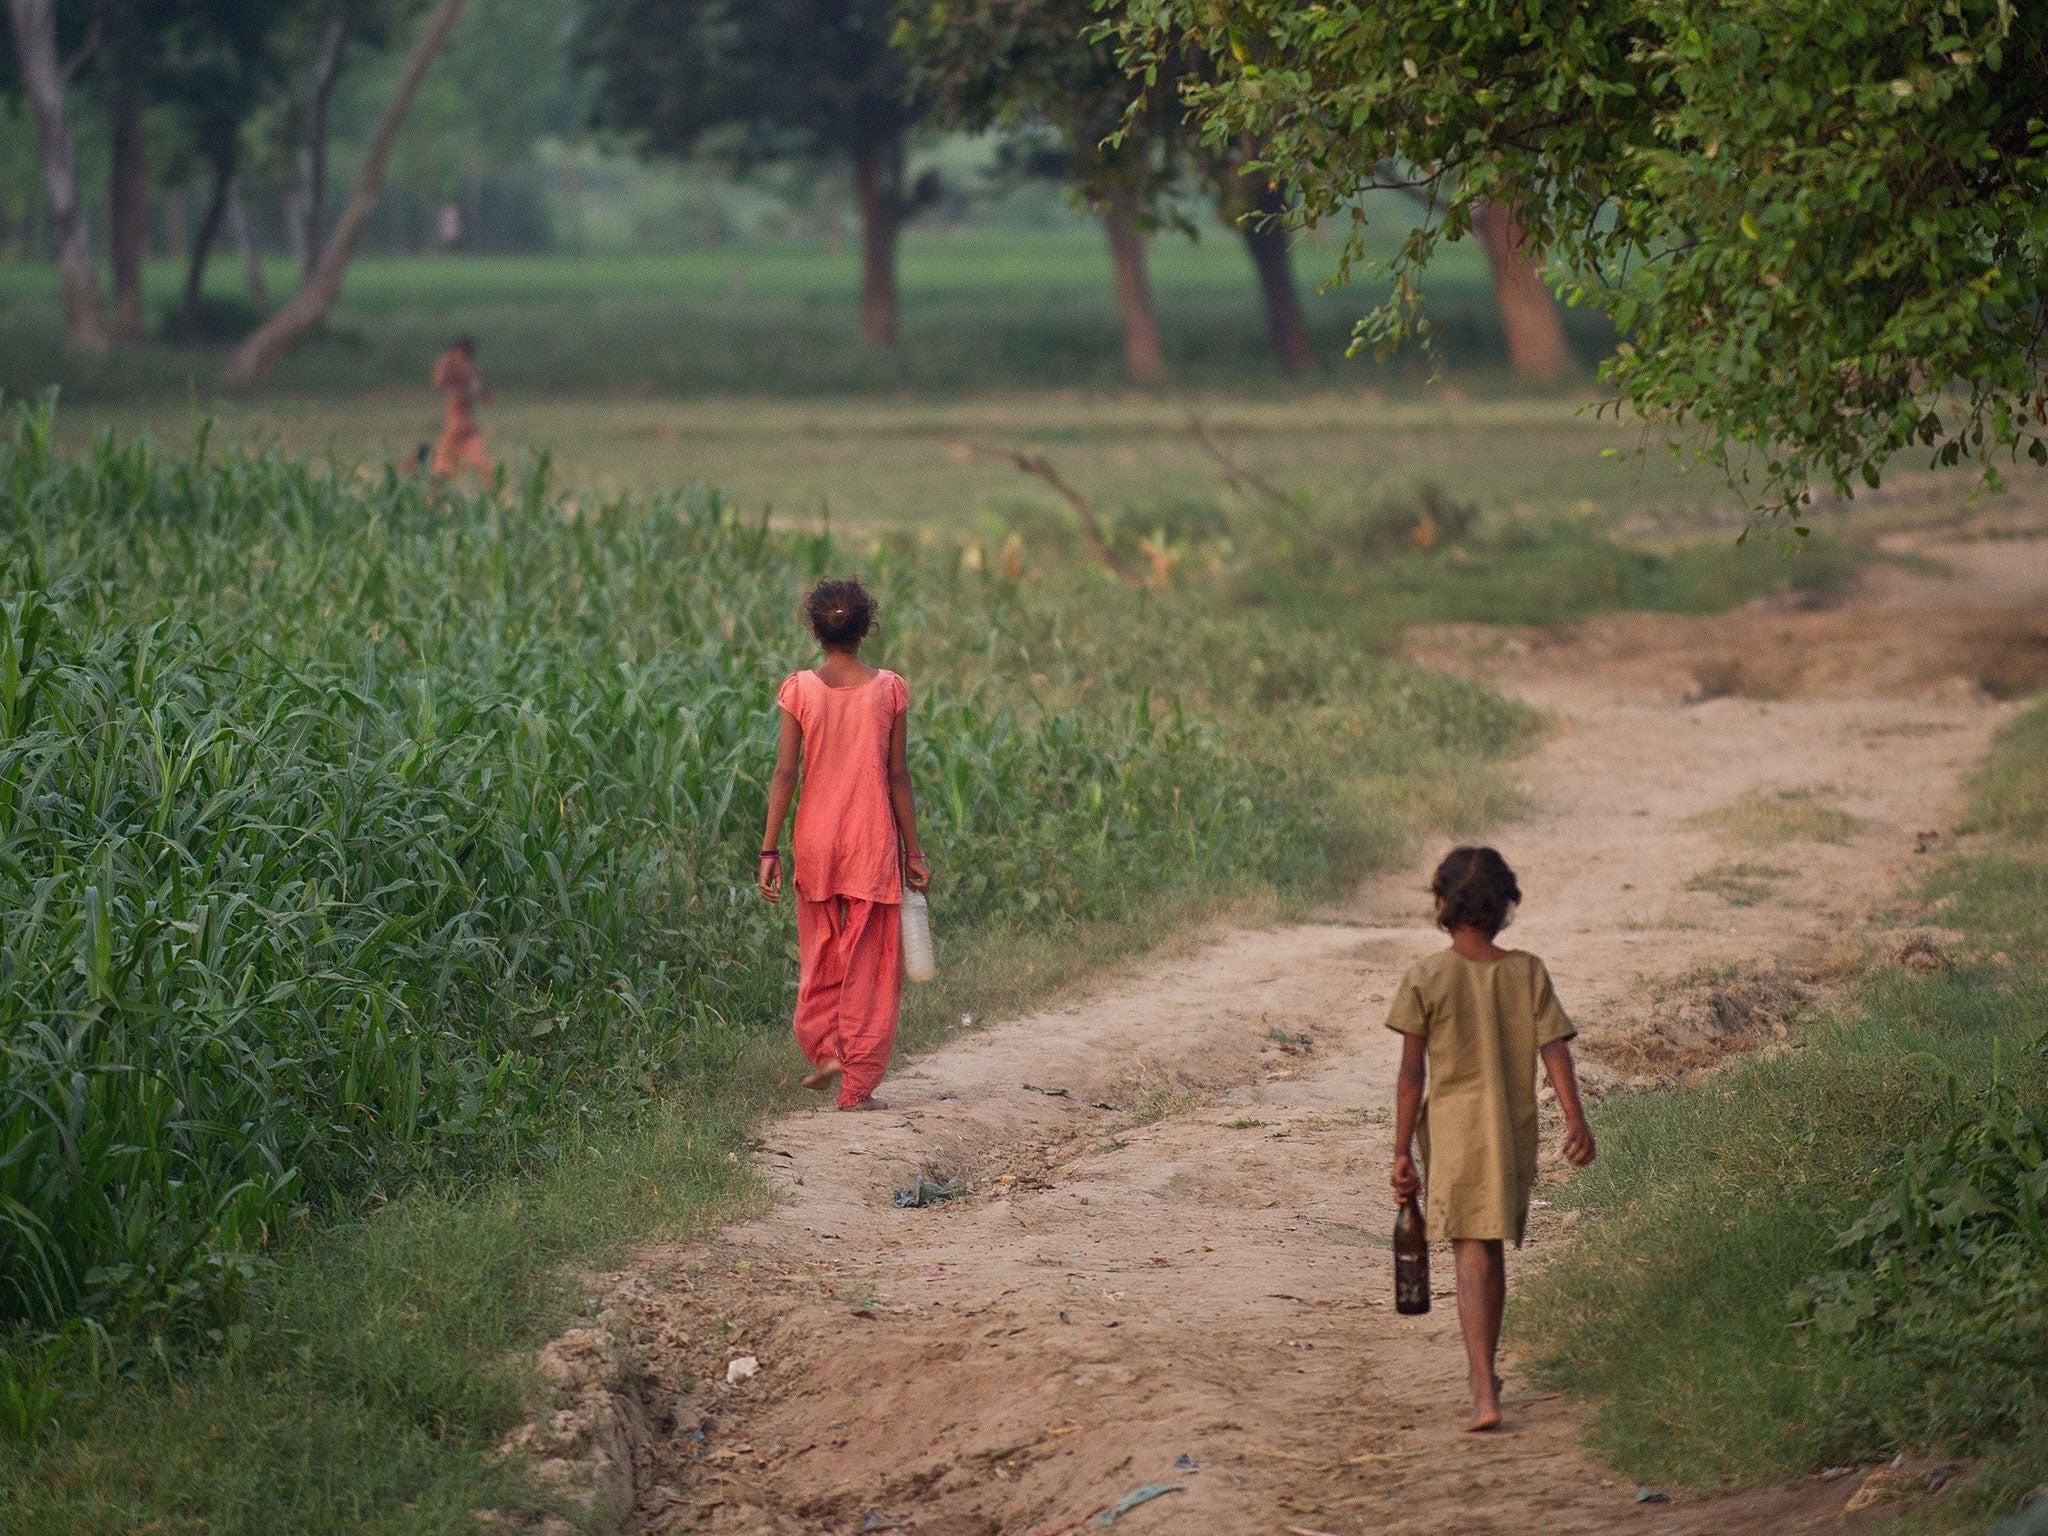 The region of Uttar Pradesh has one of the worst open defecation rates in India